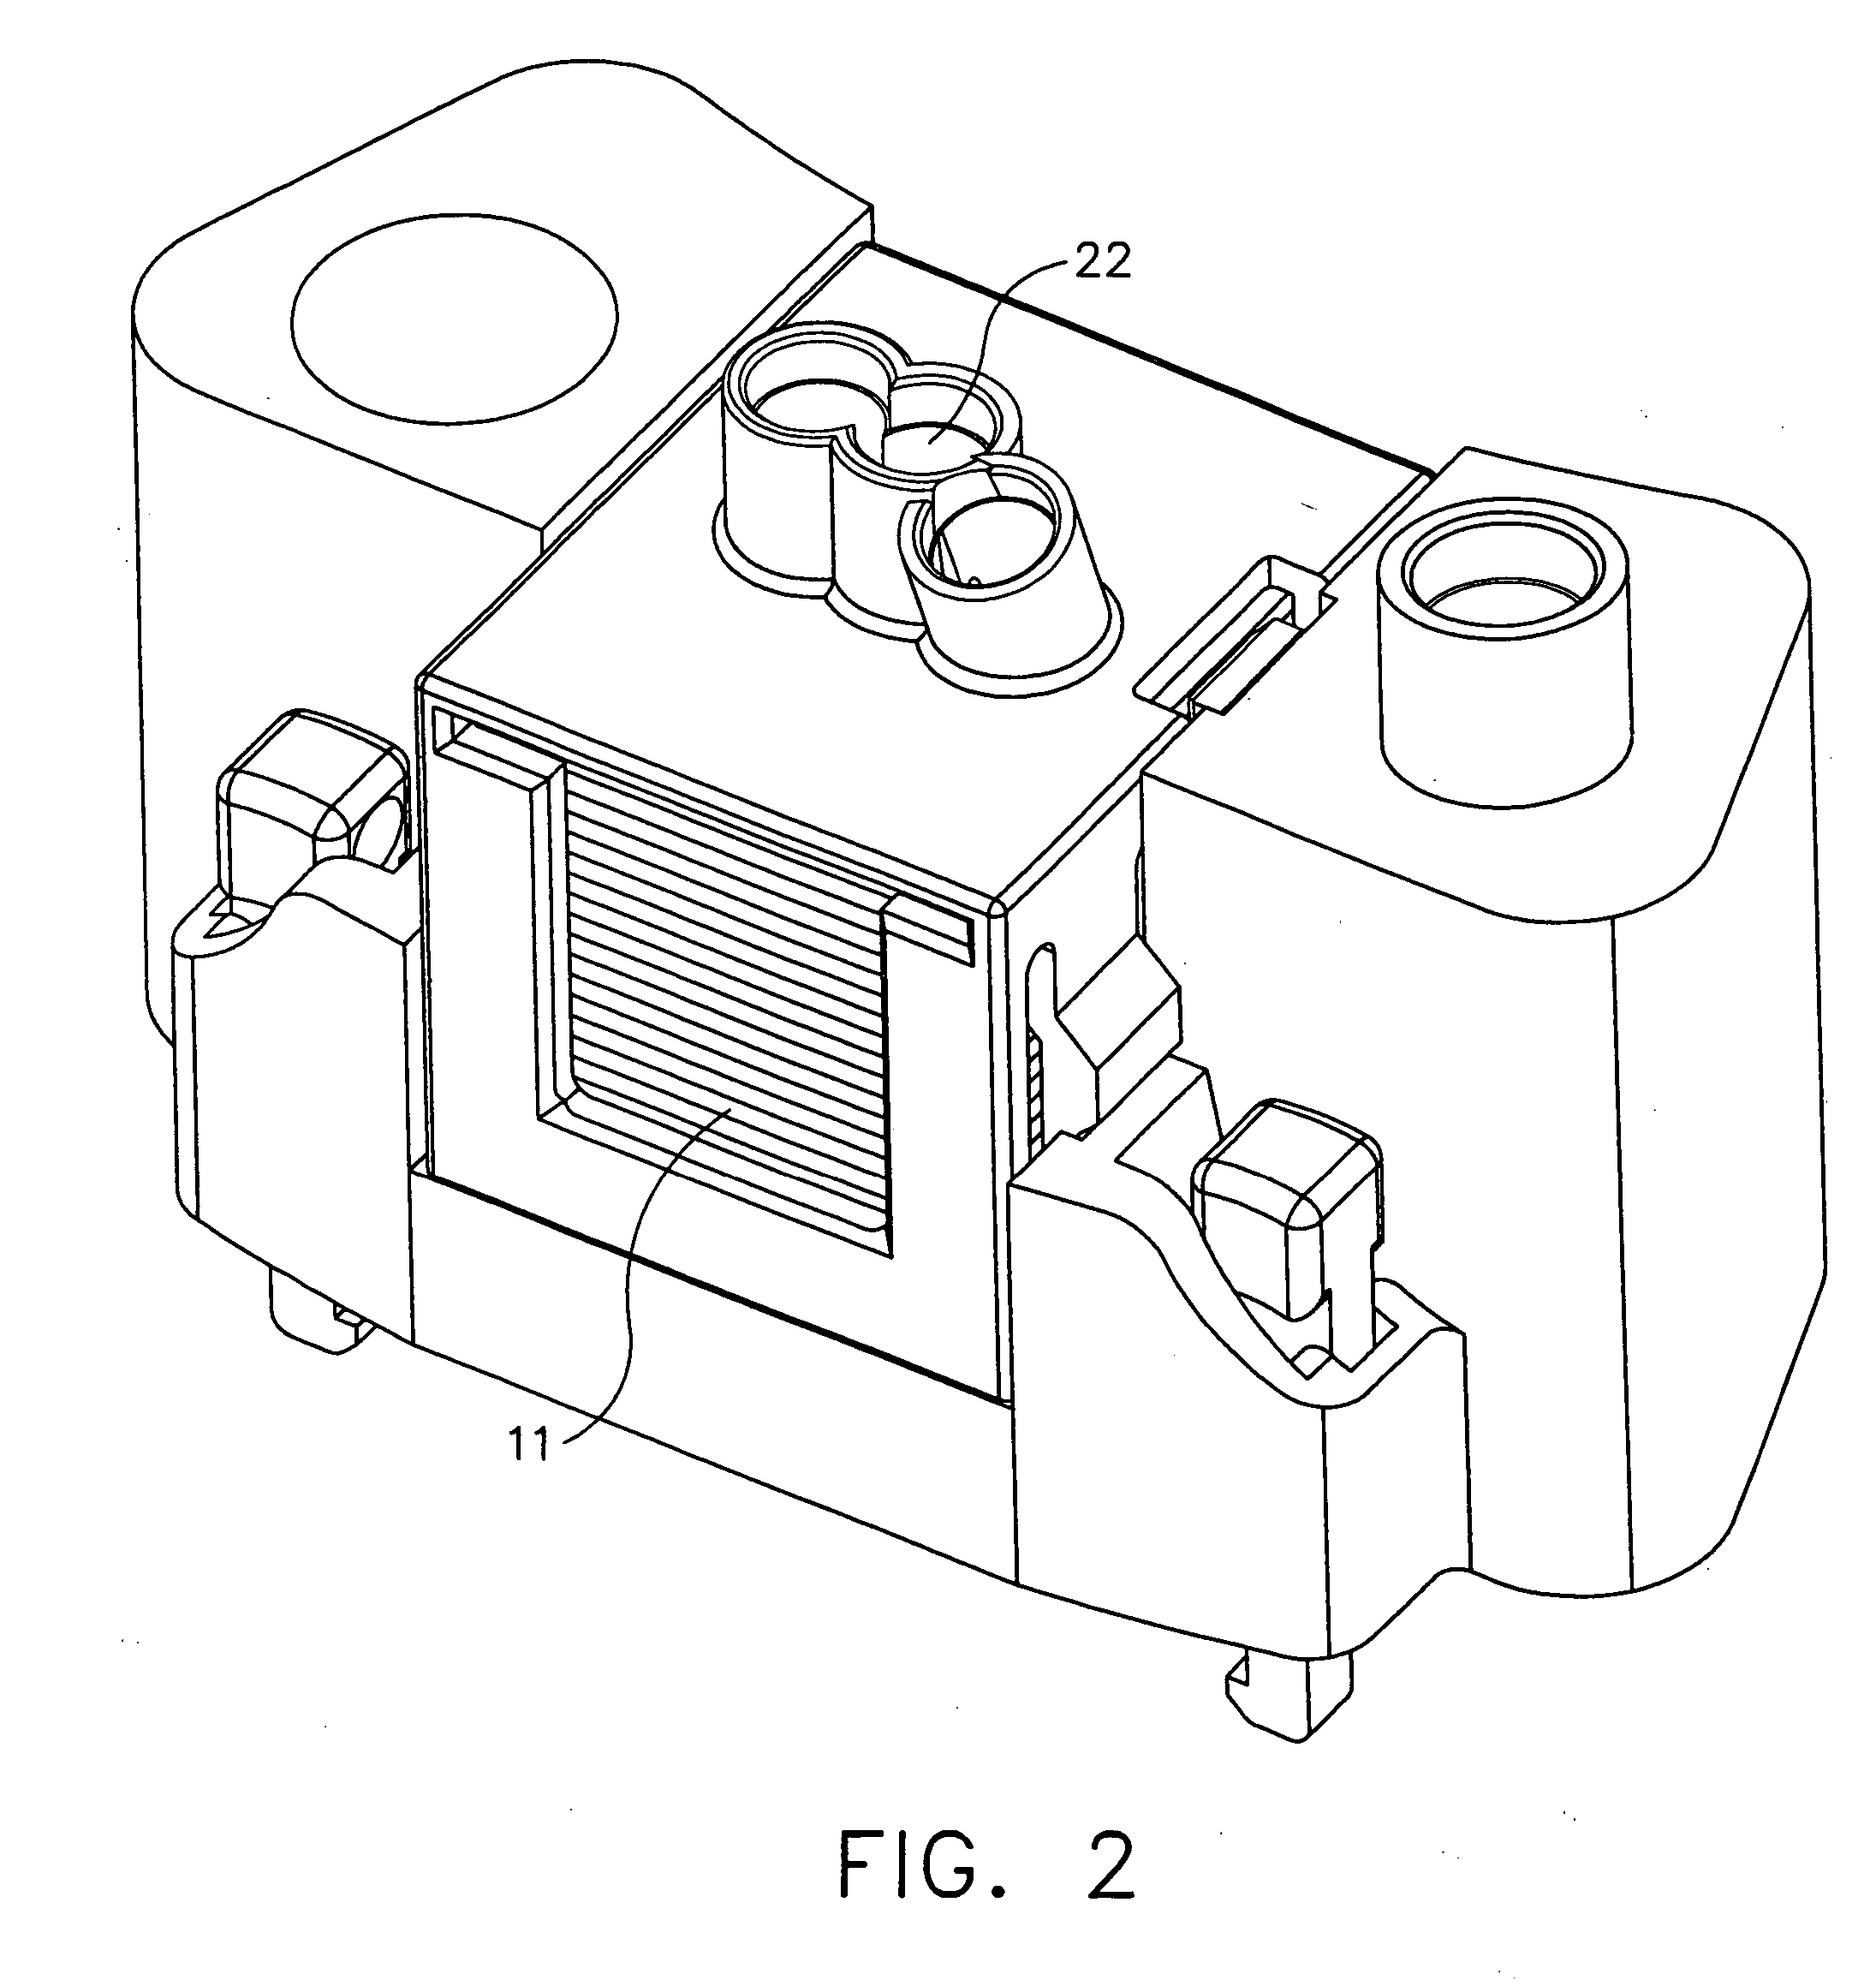 Analyzer having removable holders or a centrifuge